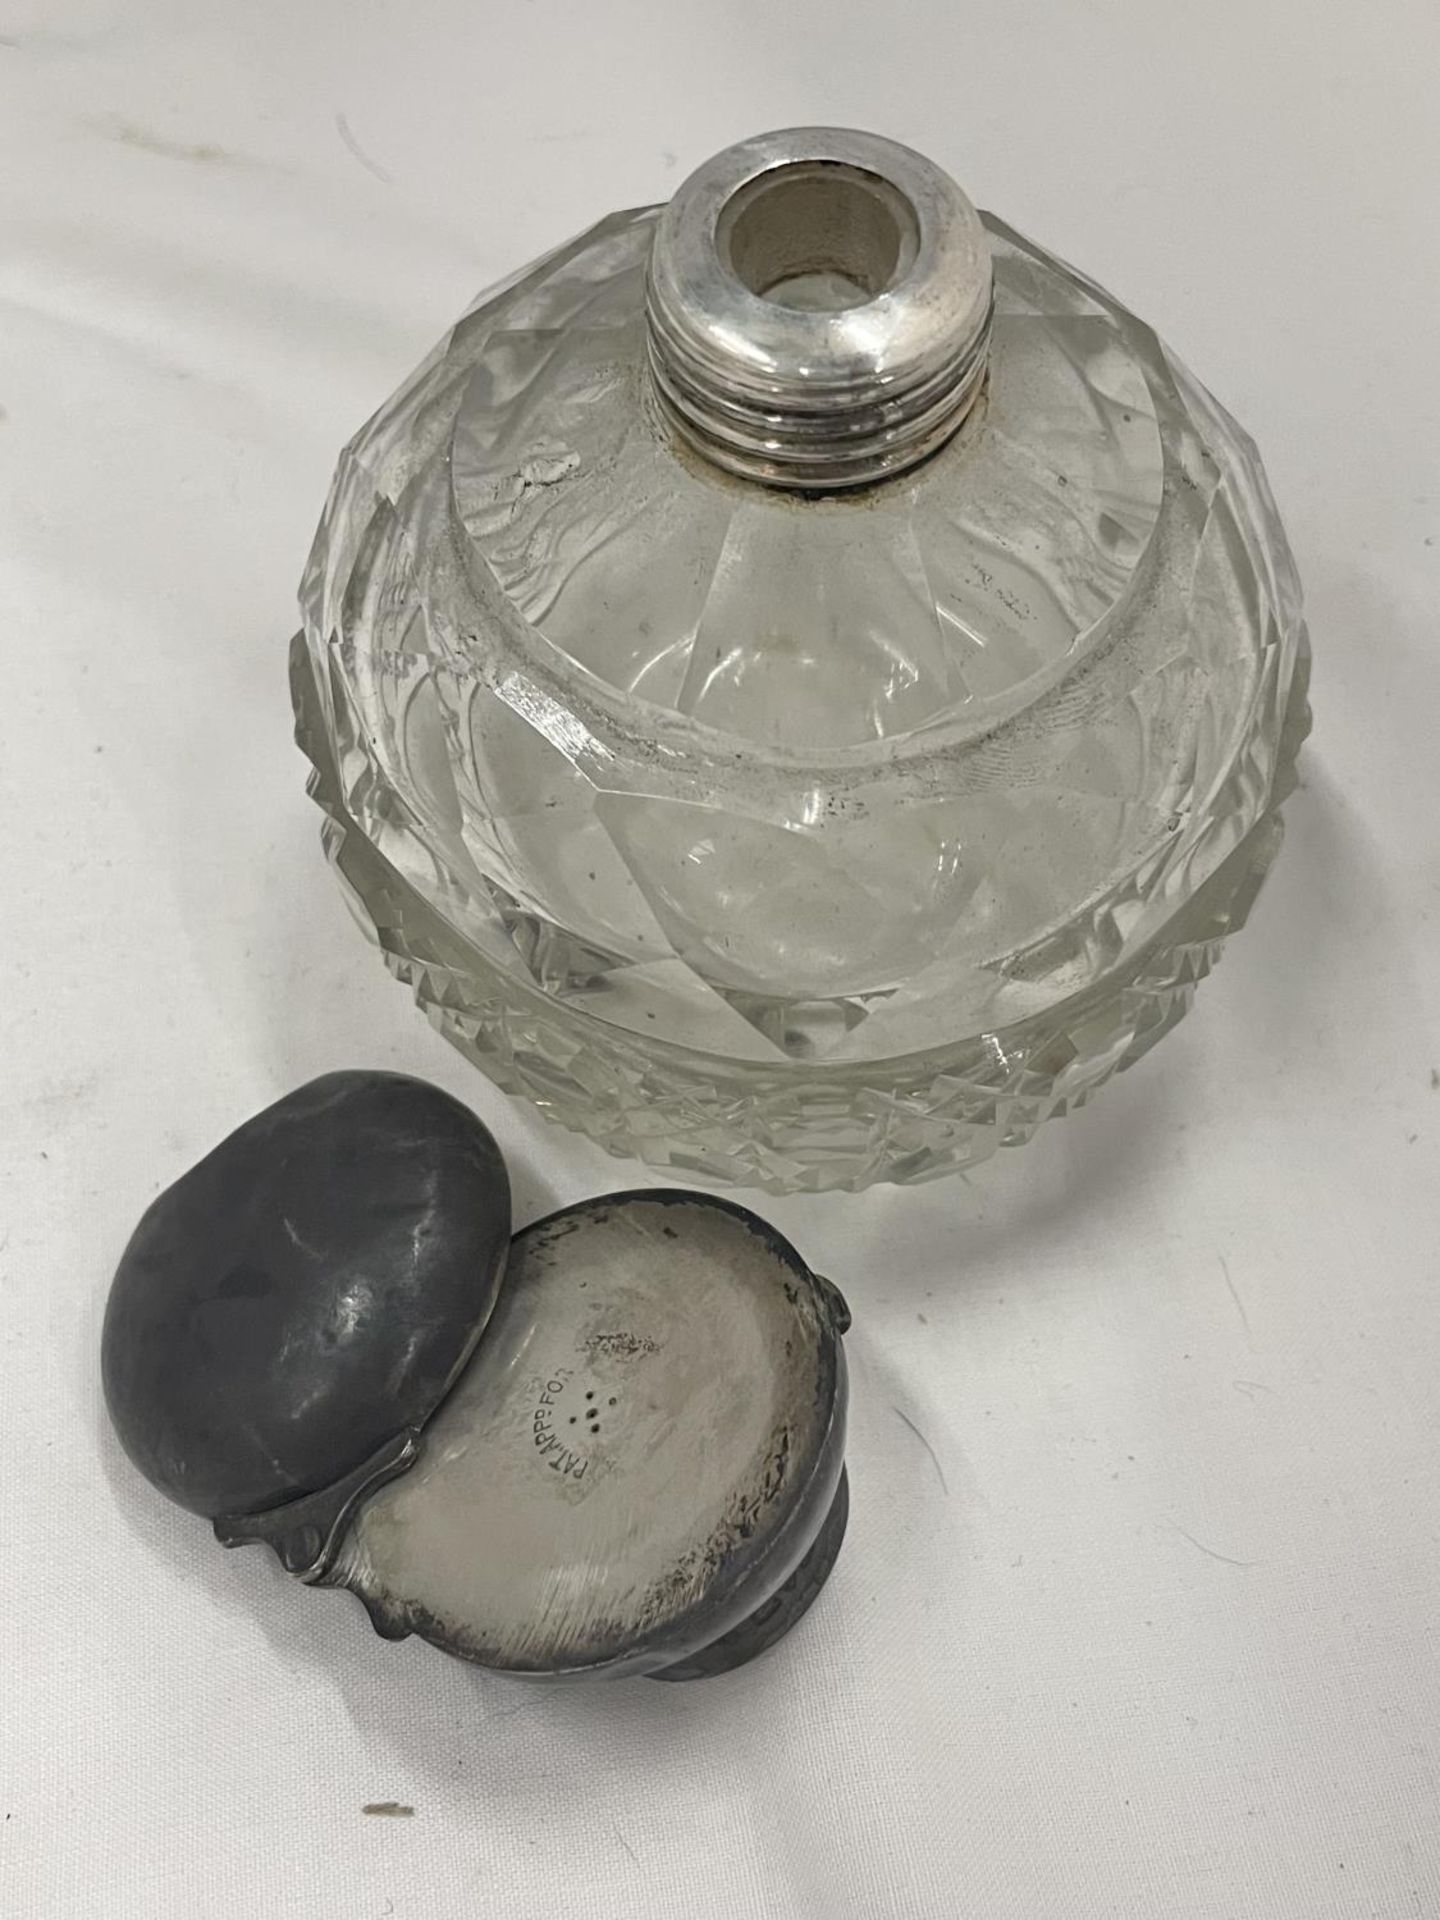 TWO CUT GLASS BOTTLES WITH HALLMARKED SILVER TOPS ONE BIRMINGHAM ONE CHESTER - Image 5 of 6